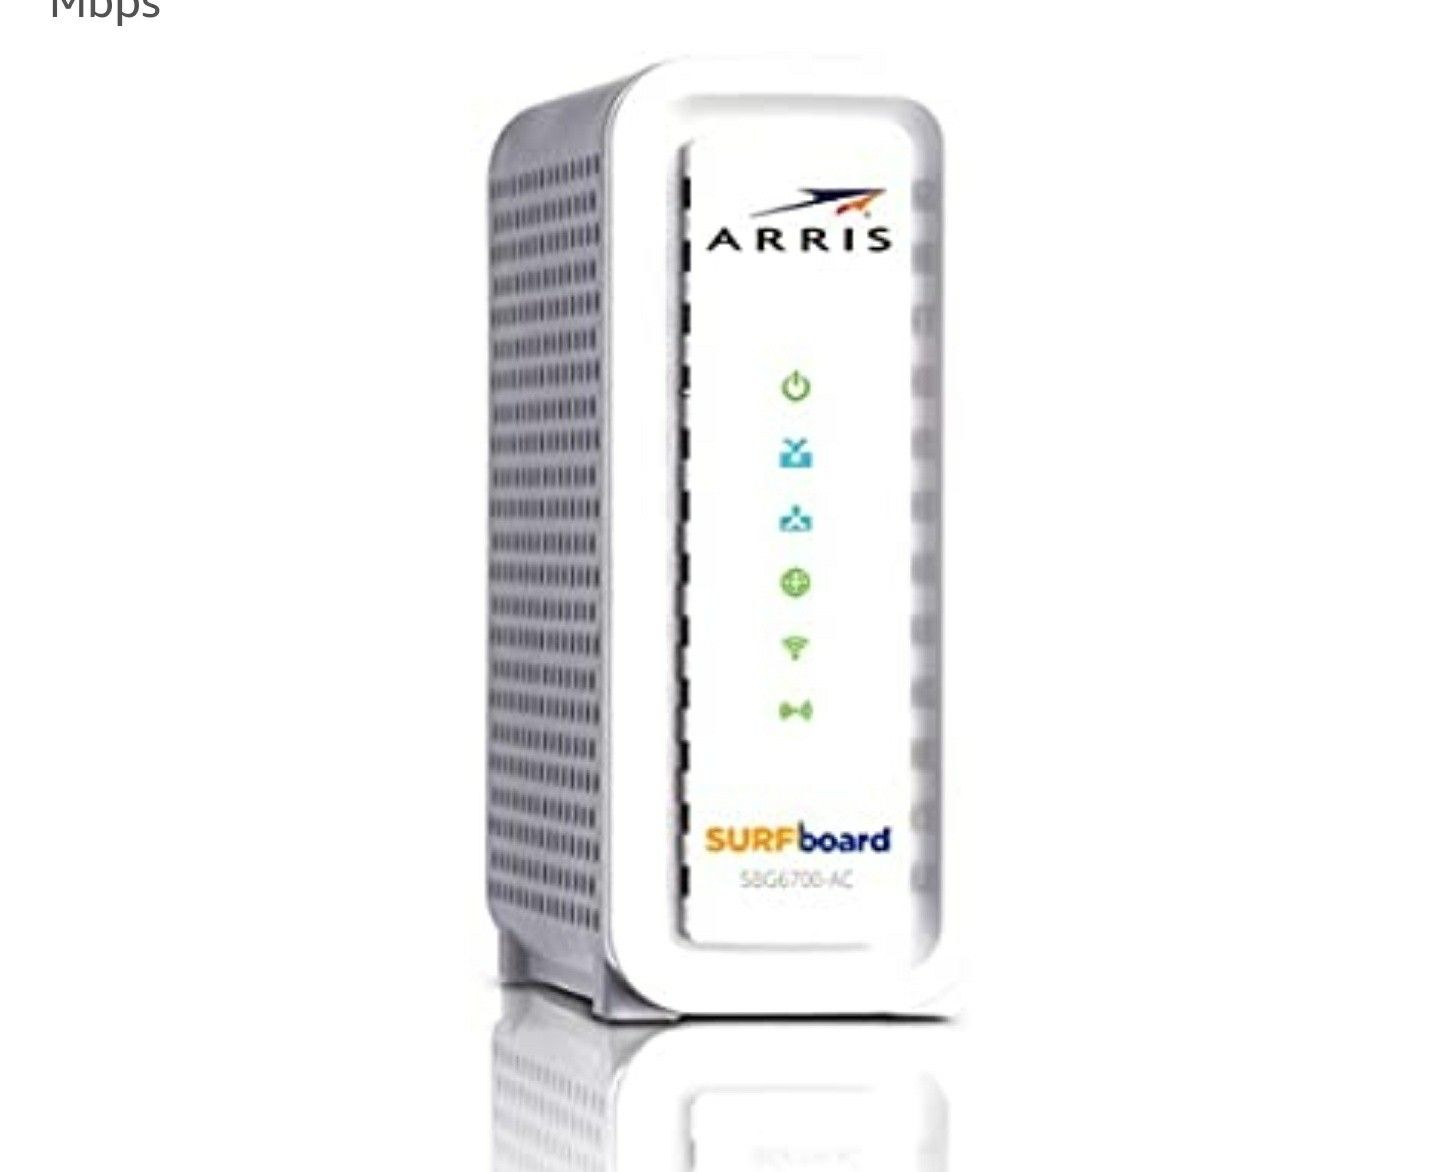 ARRIS Surfboard (8x4) Docsis 3.0 Cable Modem Plus AC1600 Dual Band Wi-Fi Router, Certified for Comcast Xfinity, Spectrum, Cox & More (SBG6700AC)